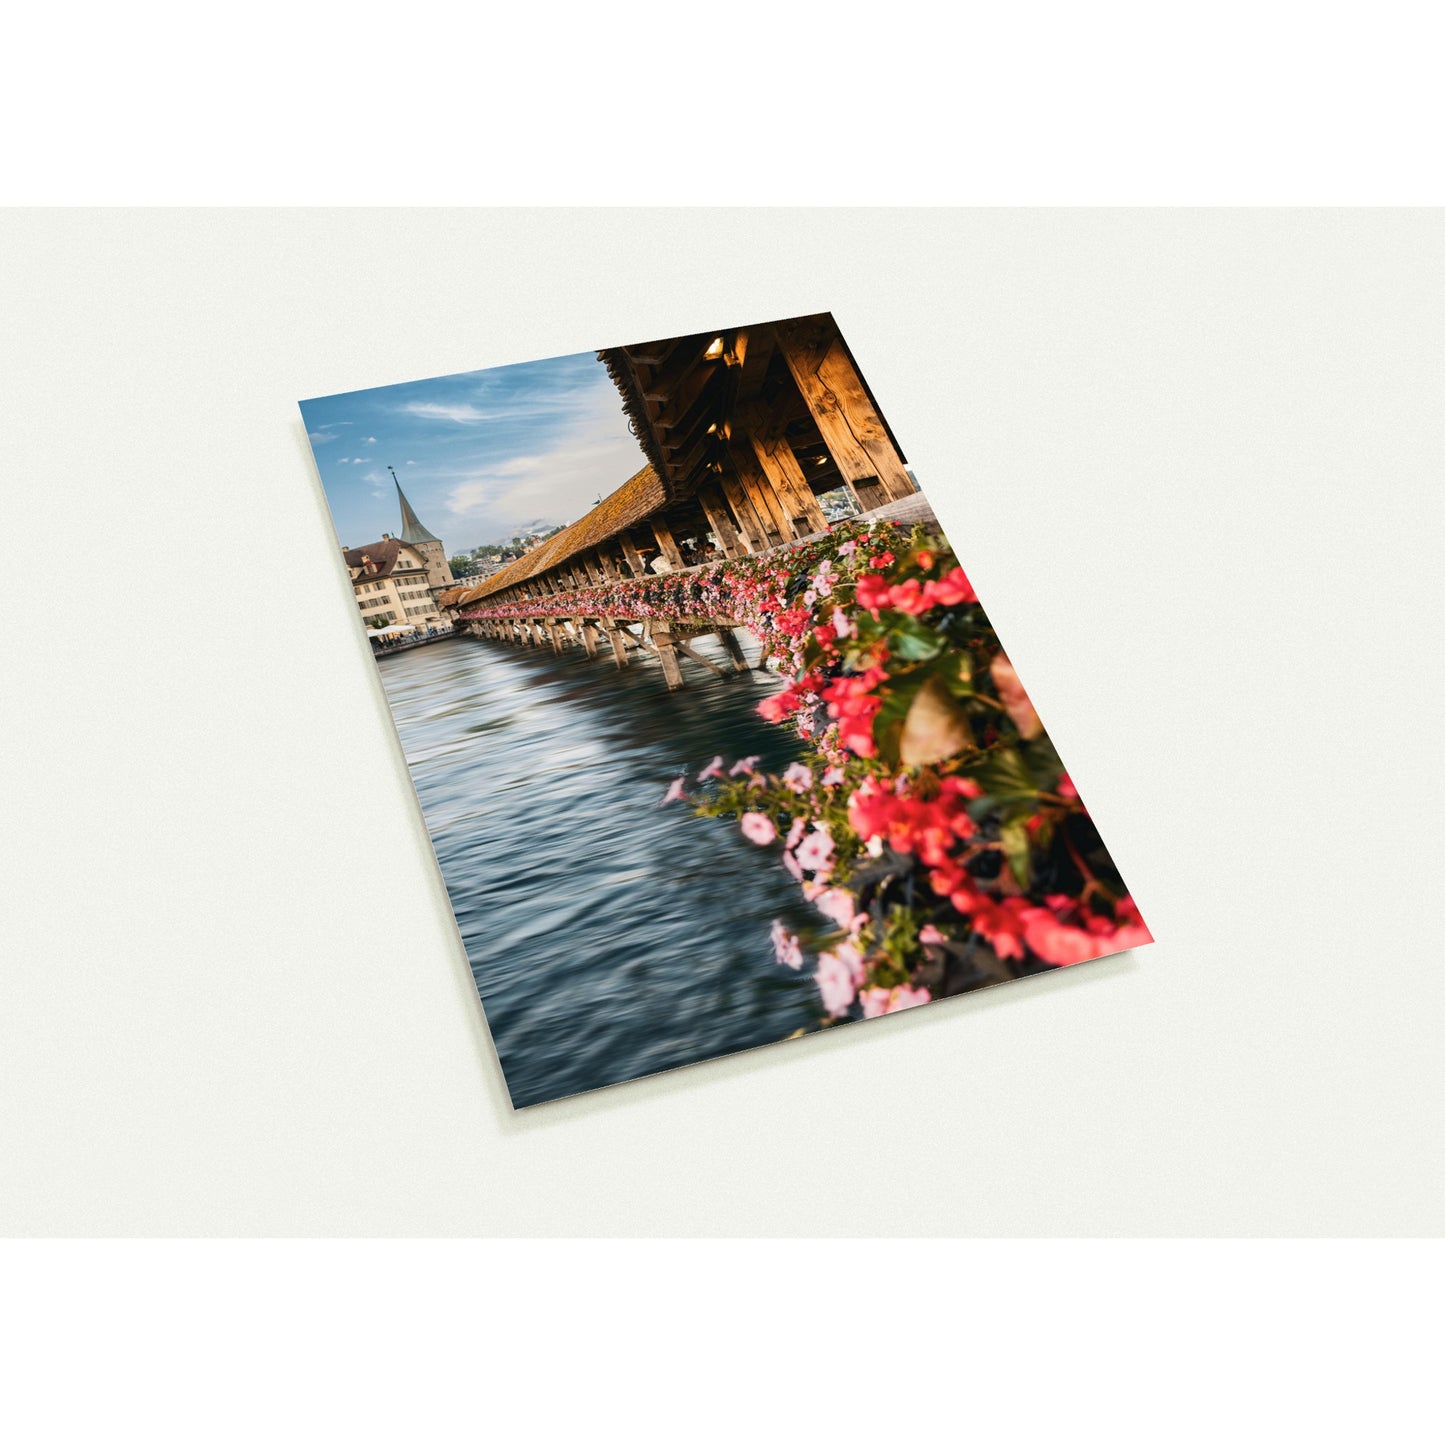 Flower-decorated Chapel Bridge greeting cards - set of 10 with envelopes